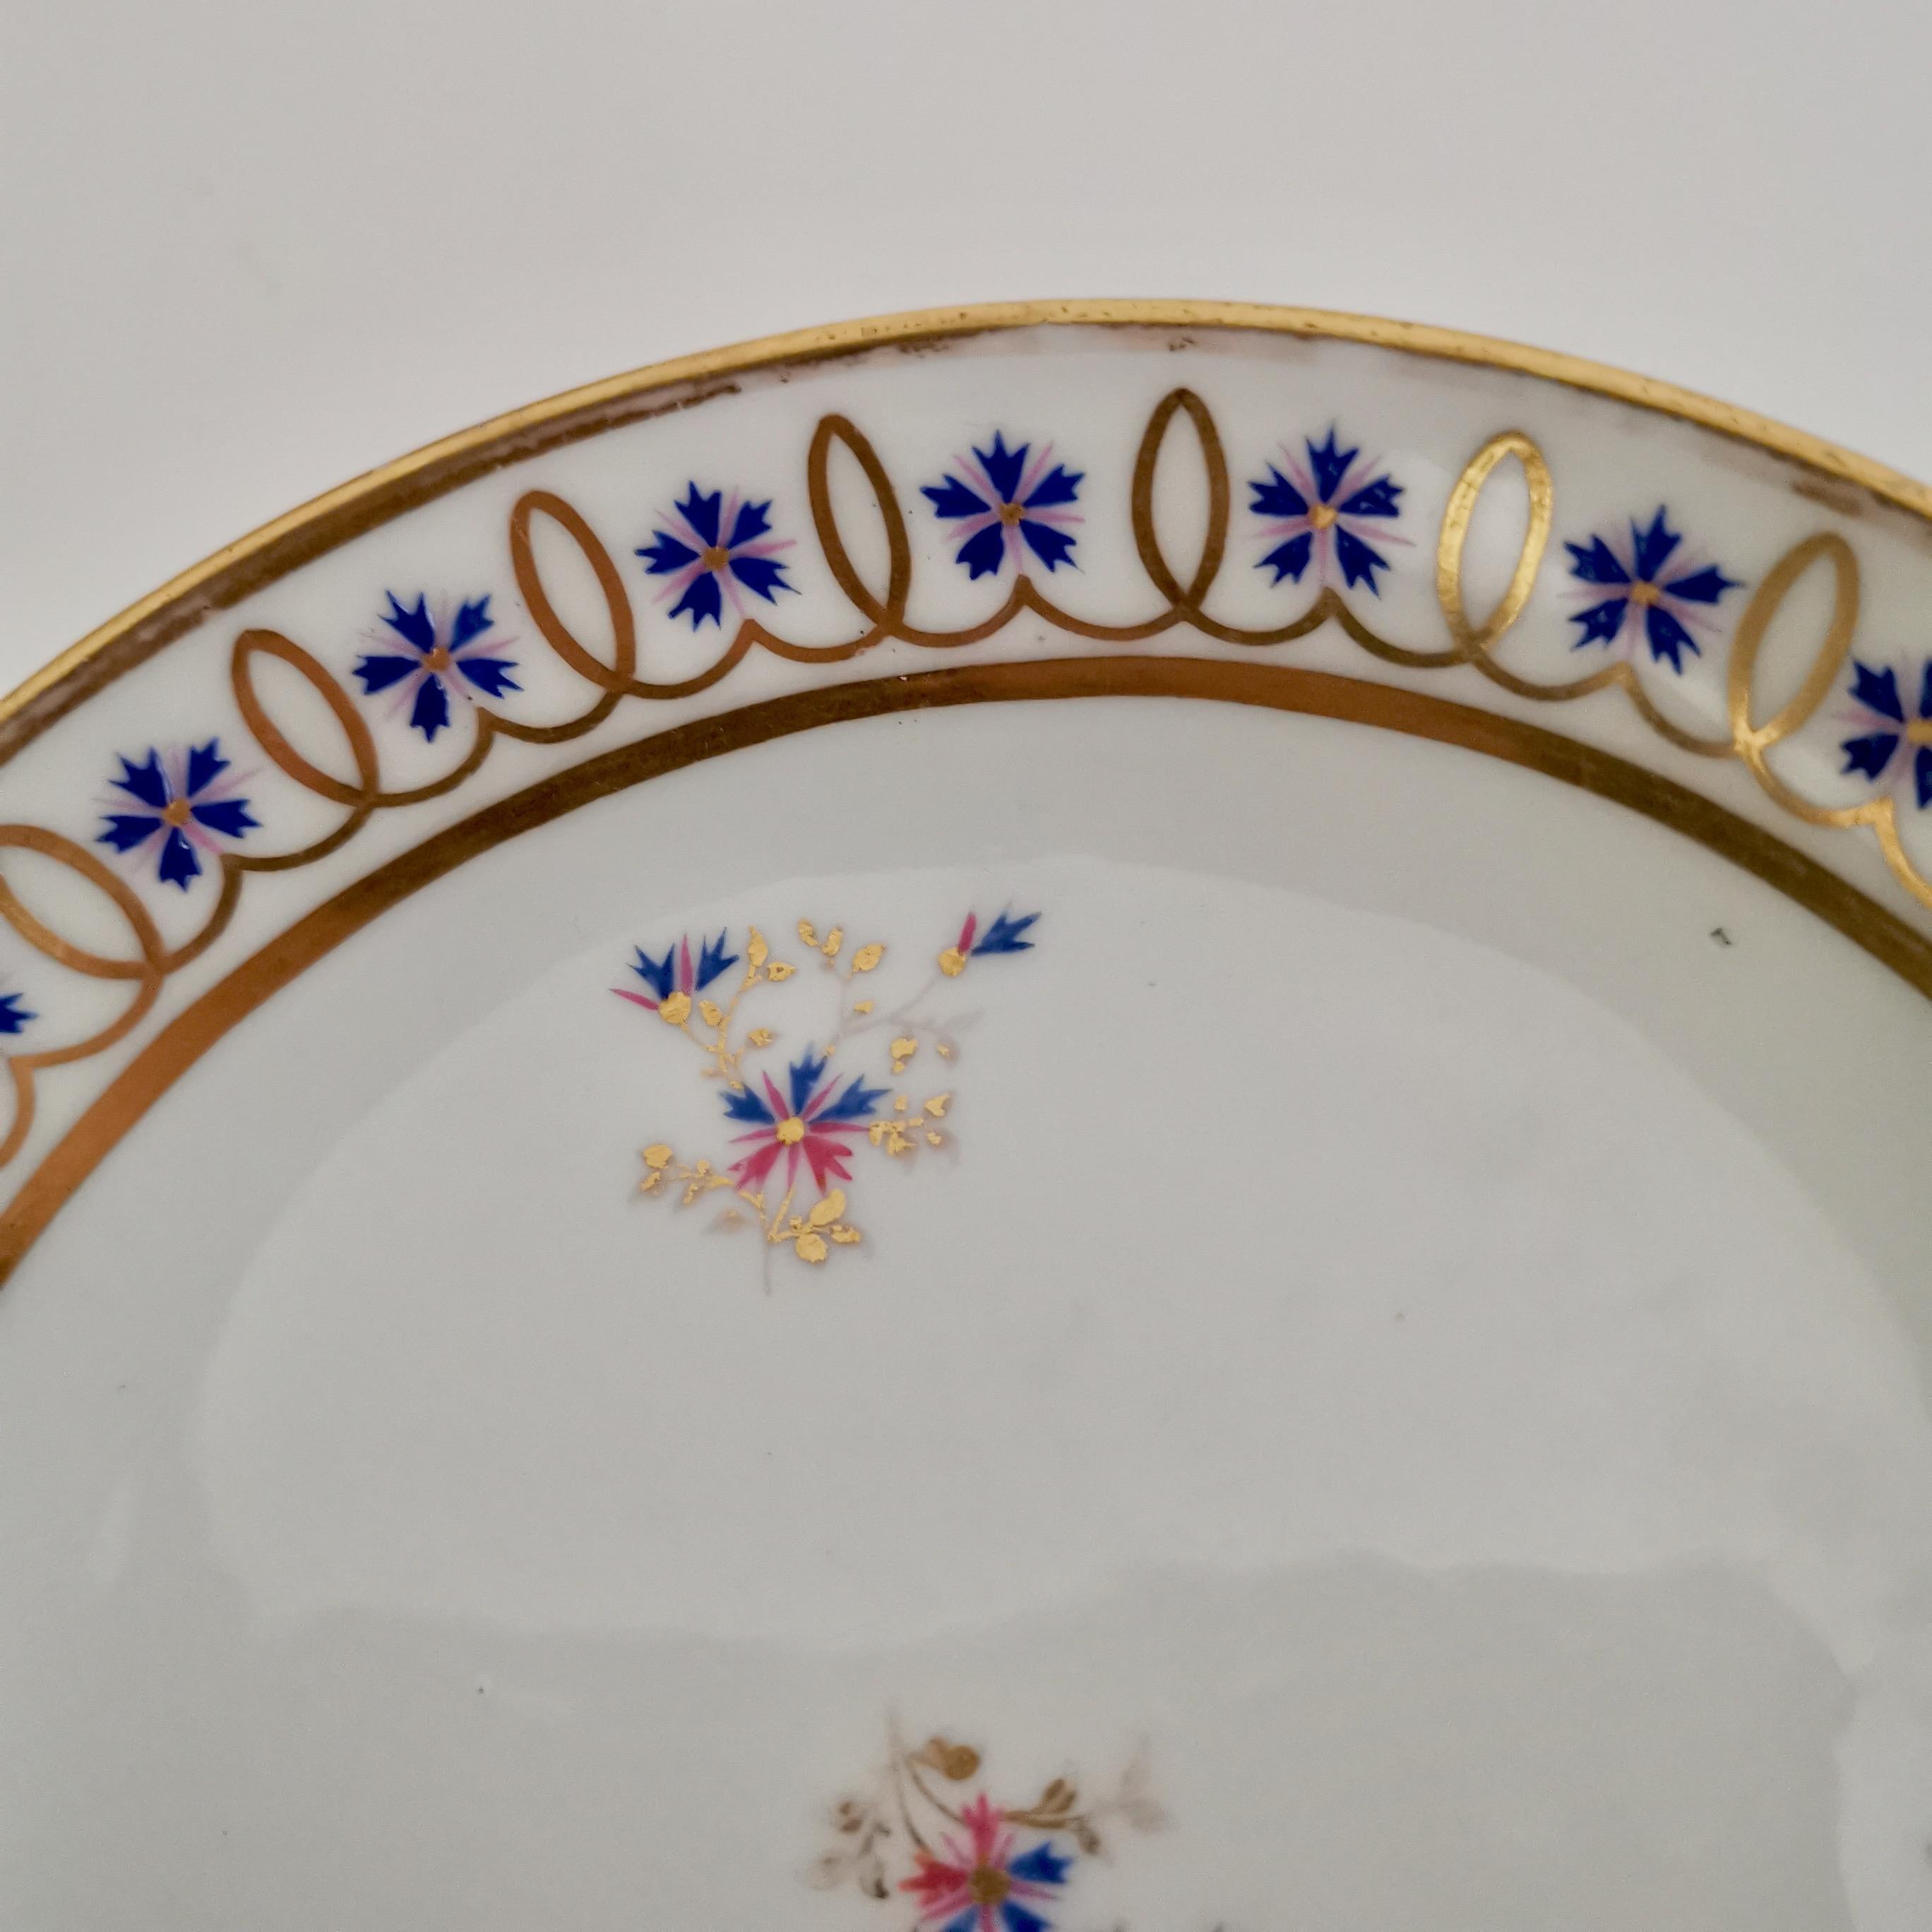 Crown Derby Porcelain Coffee Cup, White, Gilt with Blue Cornflowers, 1782-1790 4